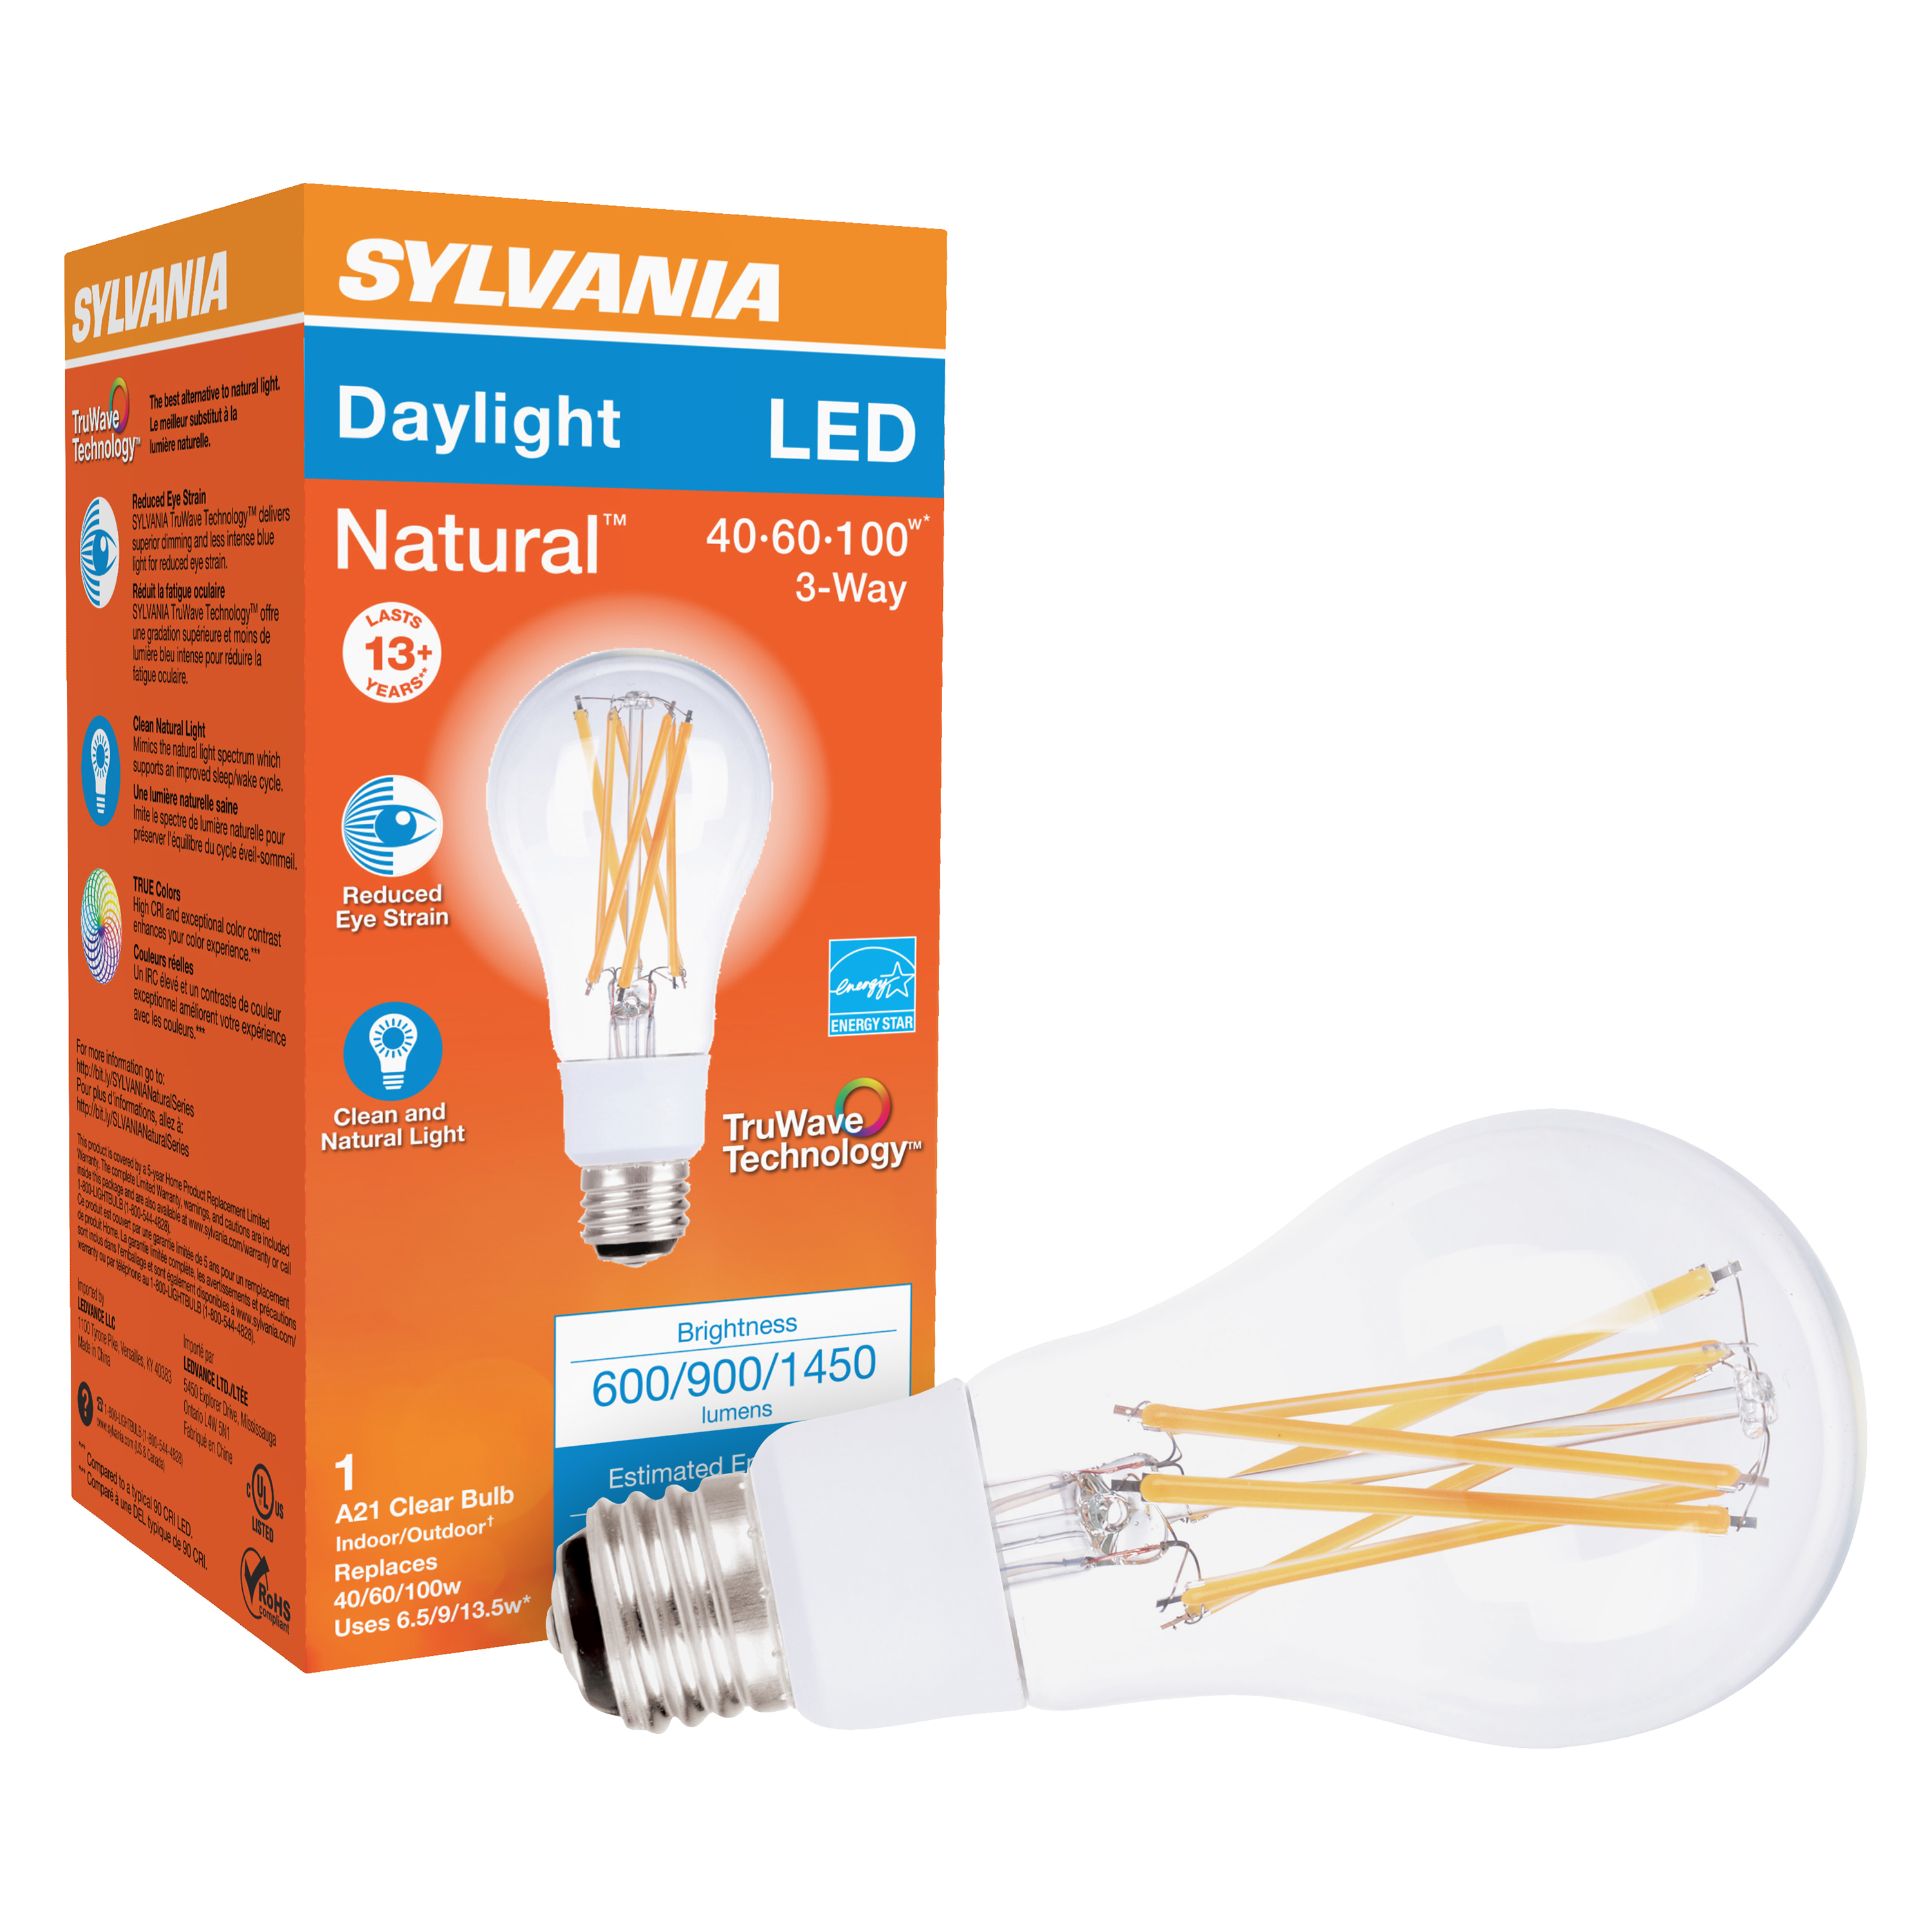 Sylvania 40770 Natural LED Bulb, 3-Way, A21 Lamp, 100 W Equivalent, E26 Lamp Base, Dimmable, Clear, Daylight Light